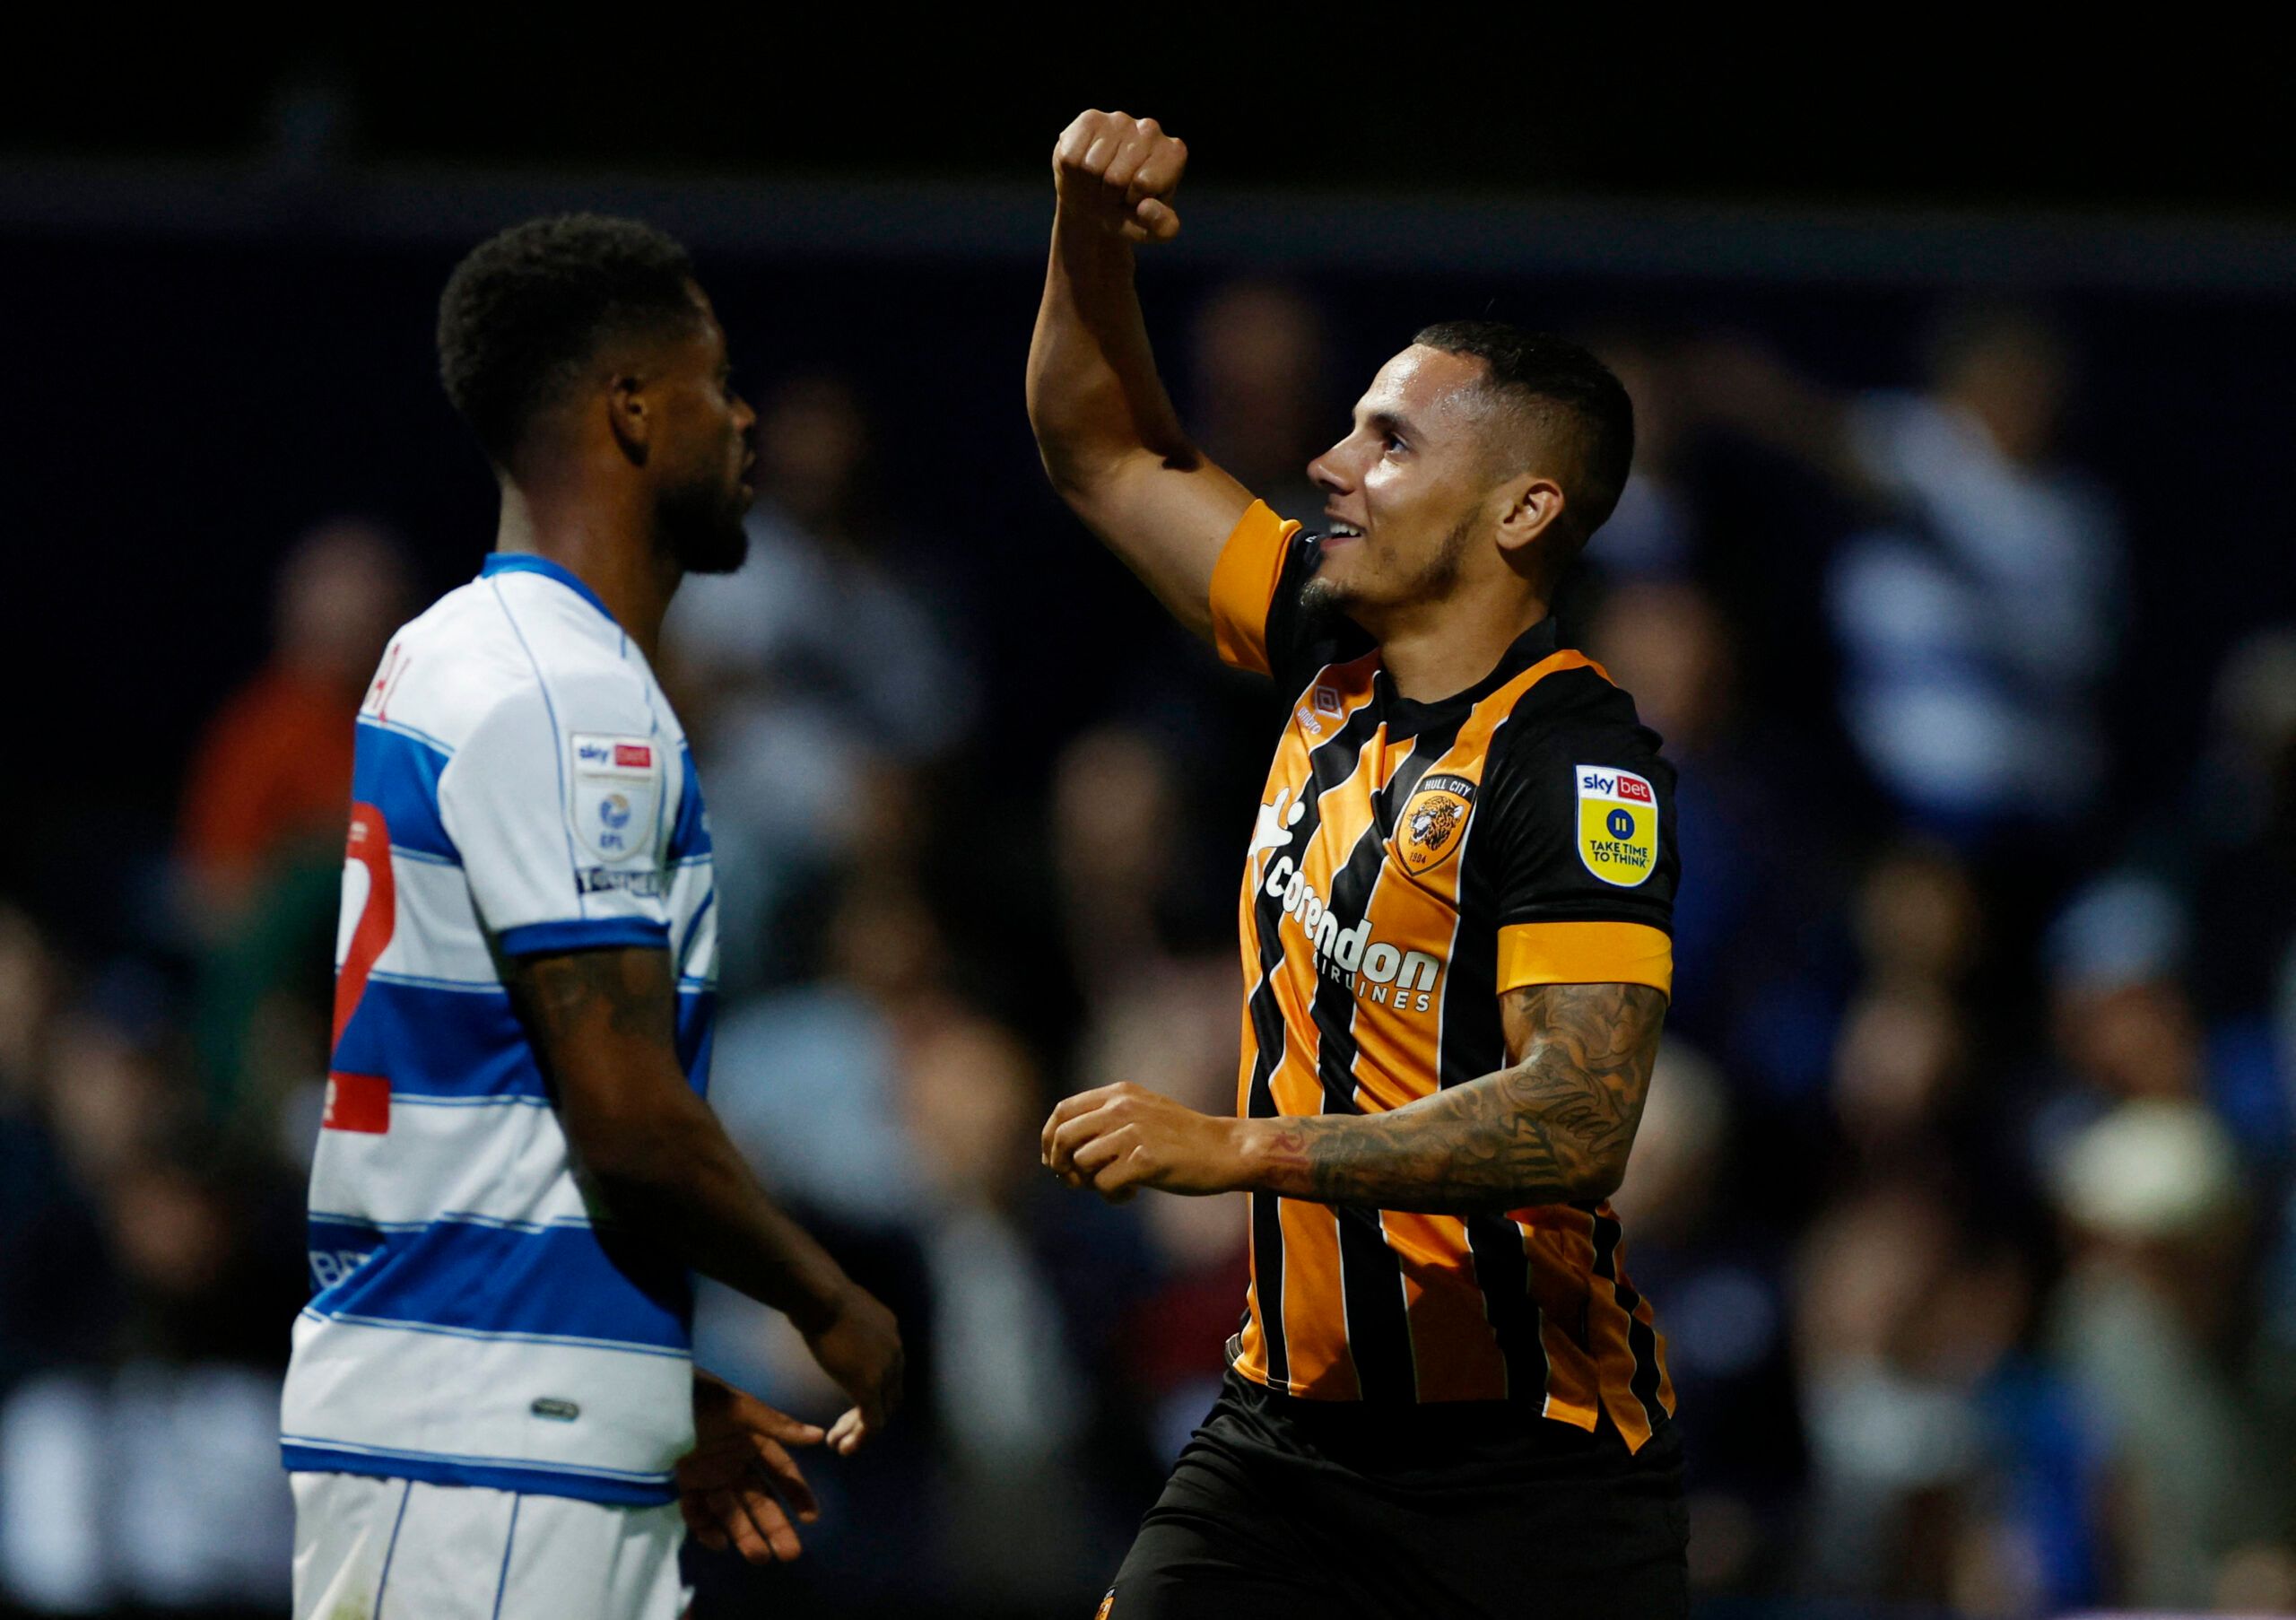 Soccer Football - Championship - Queens Park Rangers v Hull City - Loftus Road, London, Britain - August 30, 2022  Hull City's Tyler Smith celebrates scoring their first goal Action Images/John Sibley EDITORIAL USE ONLY. No use with unauthorized audio, video, data, fixture lists, club/league logos or 'live' services. Online in-match use limited to 75 images, no video emulation. No use in betting, games or single club /league/player publications.  Please contact your account representative for fu